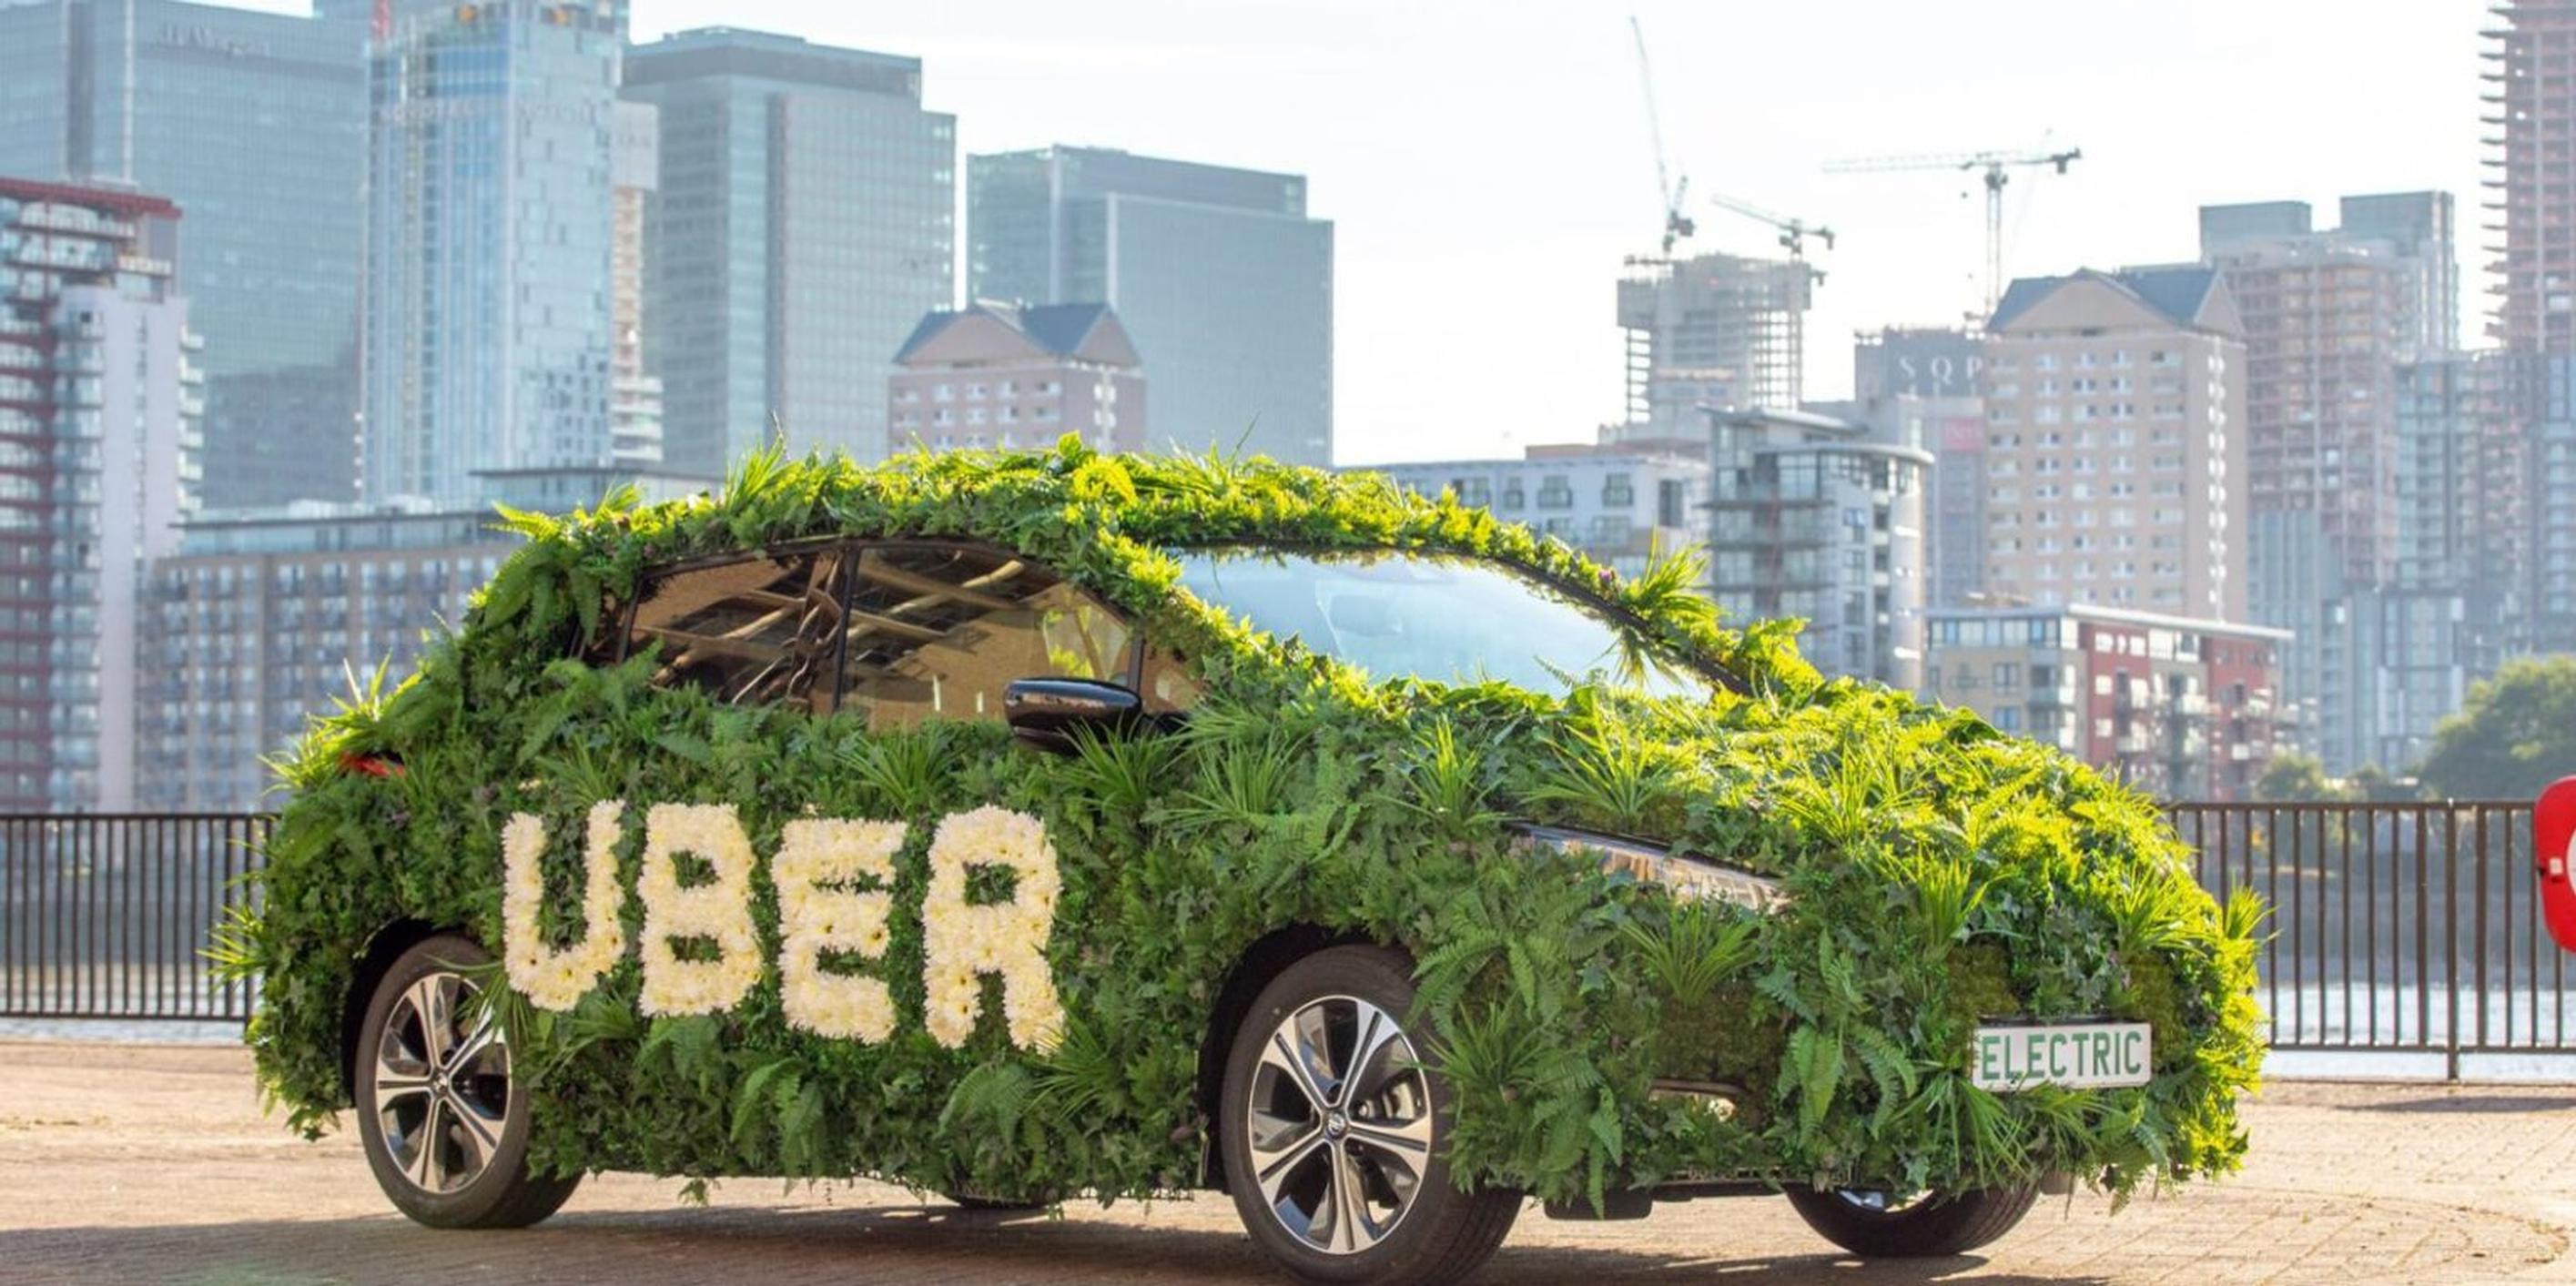 Uber is encouraging its drivers to transition to greener electric vehicles